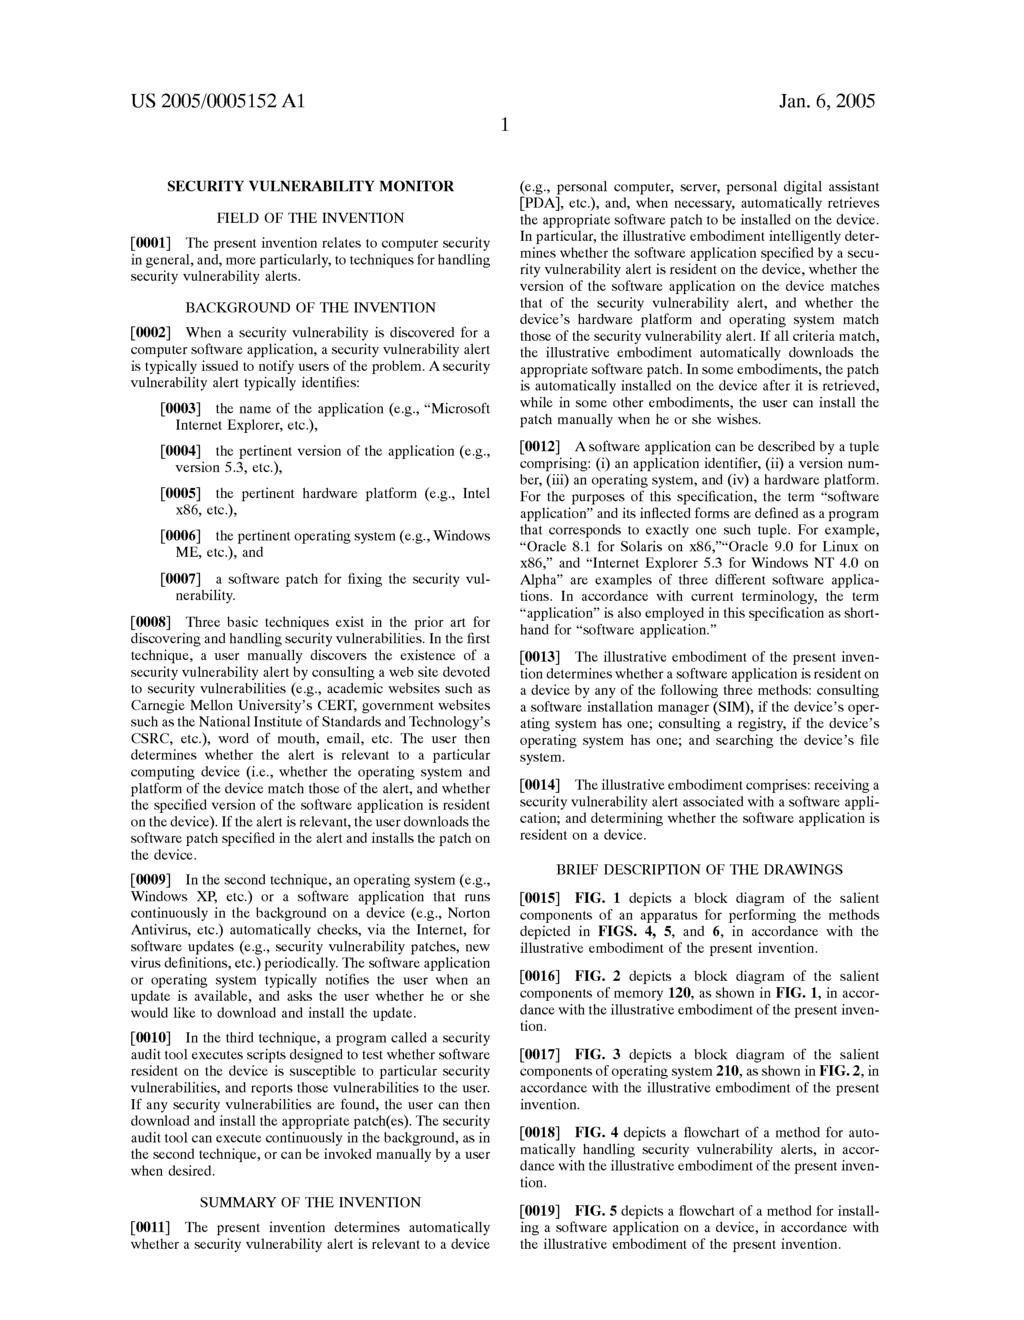 US 2005/0005152 A1 Jan. 6, 2005 SECURITY VULNERABILITY MONITOR FIELD OF THE INVENTION 0001.